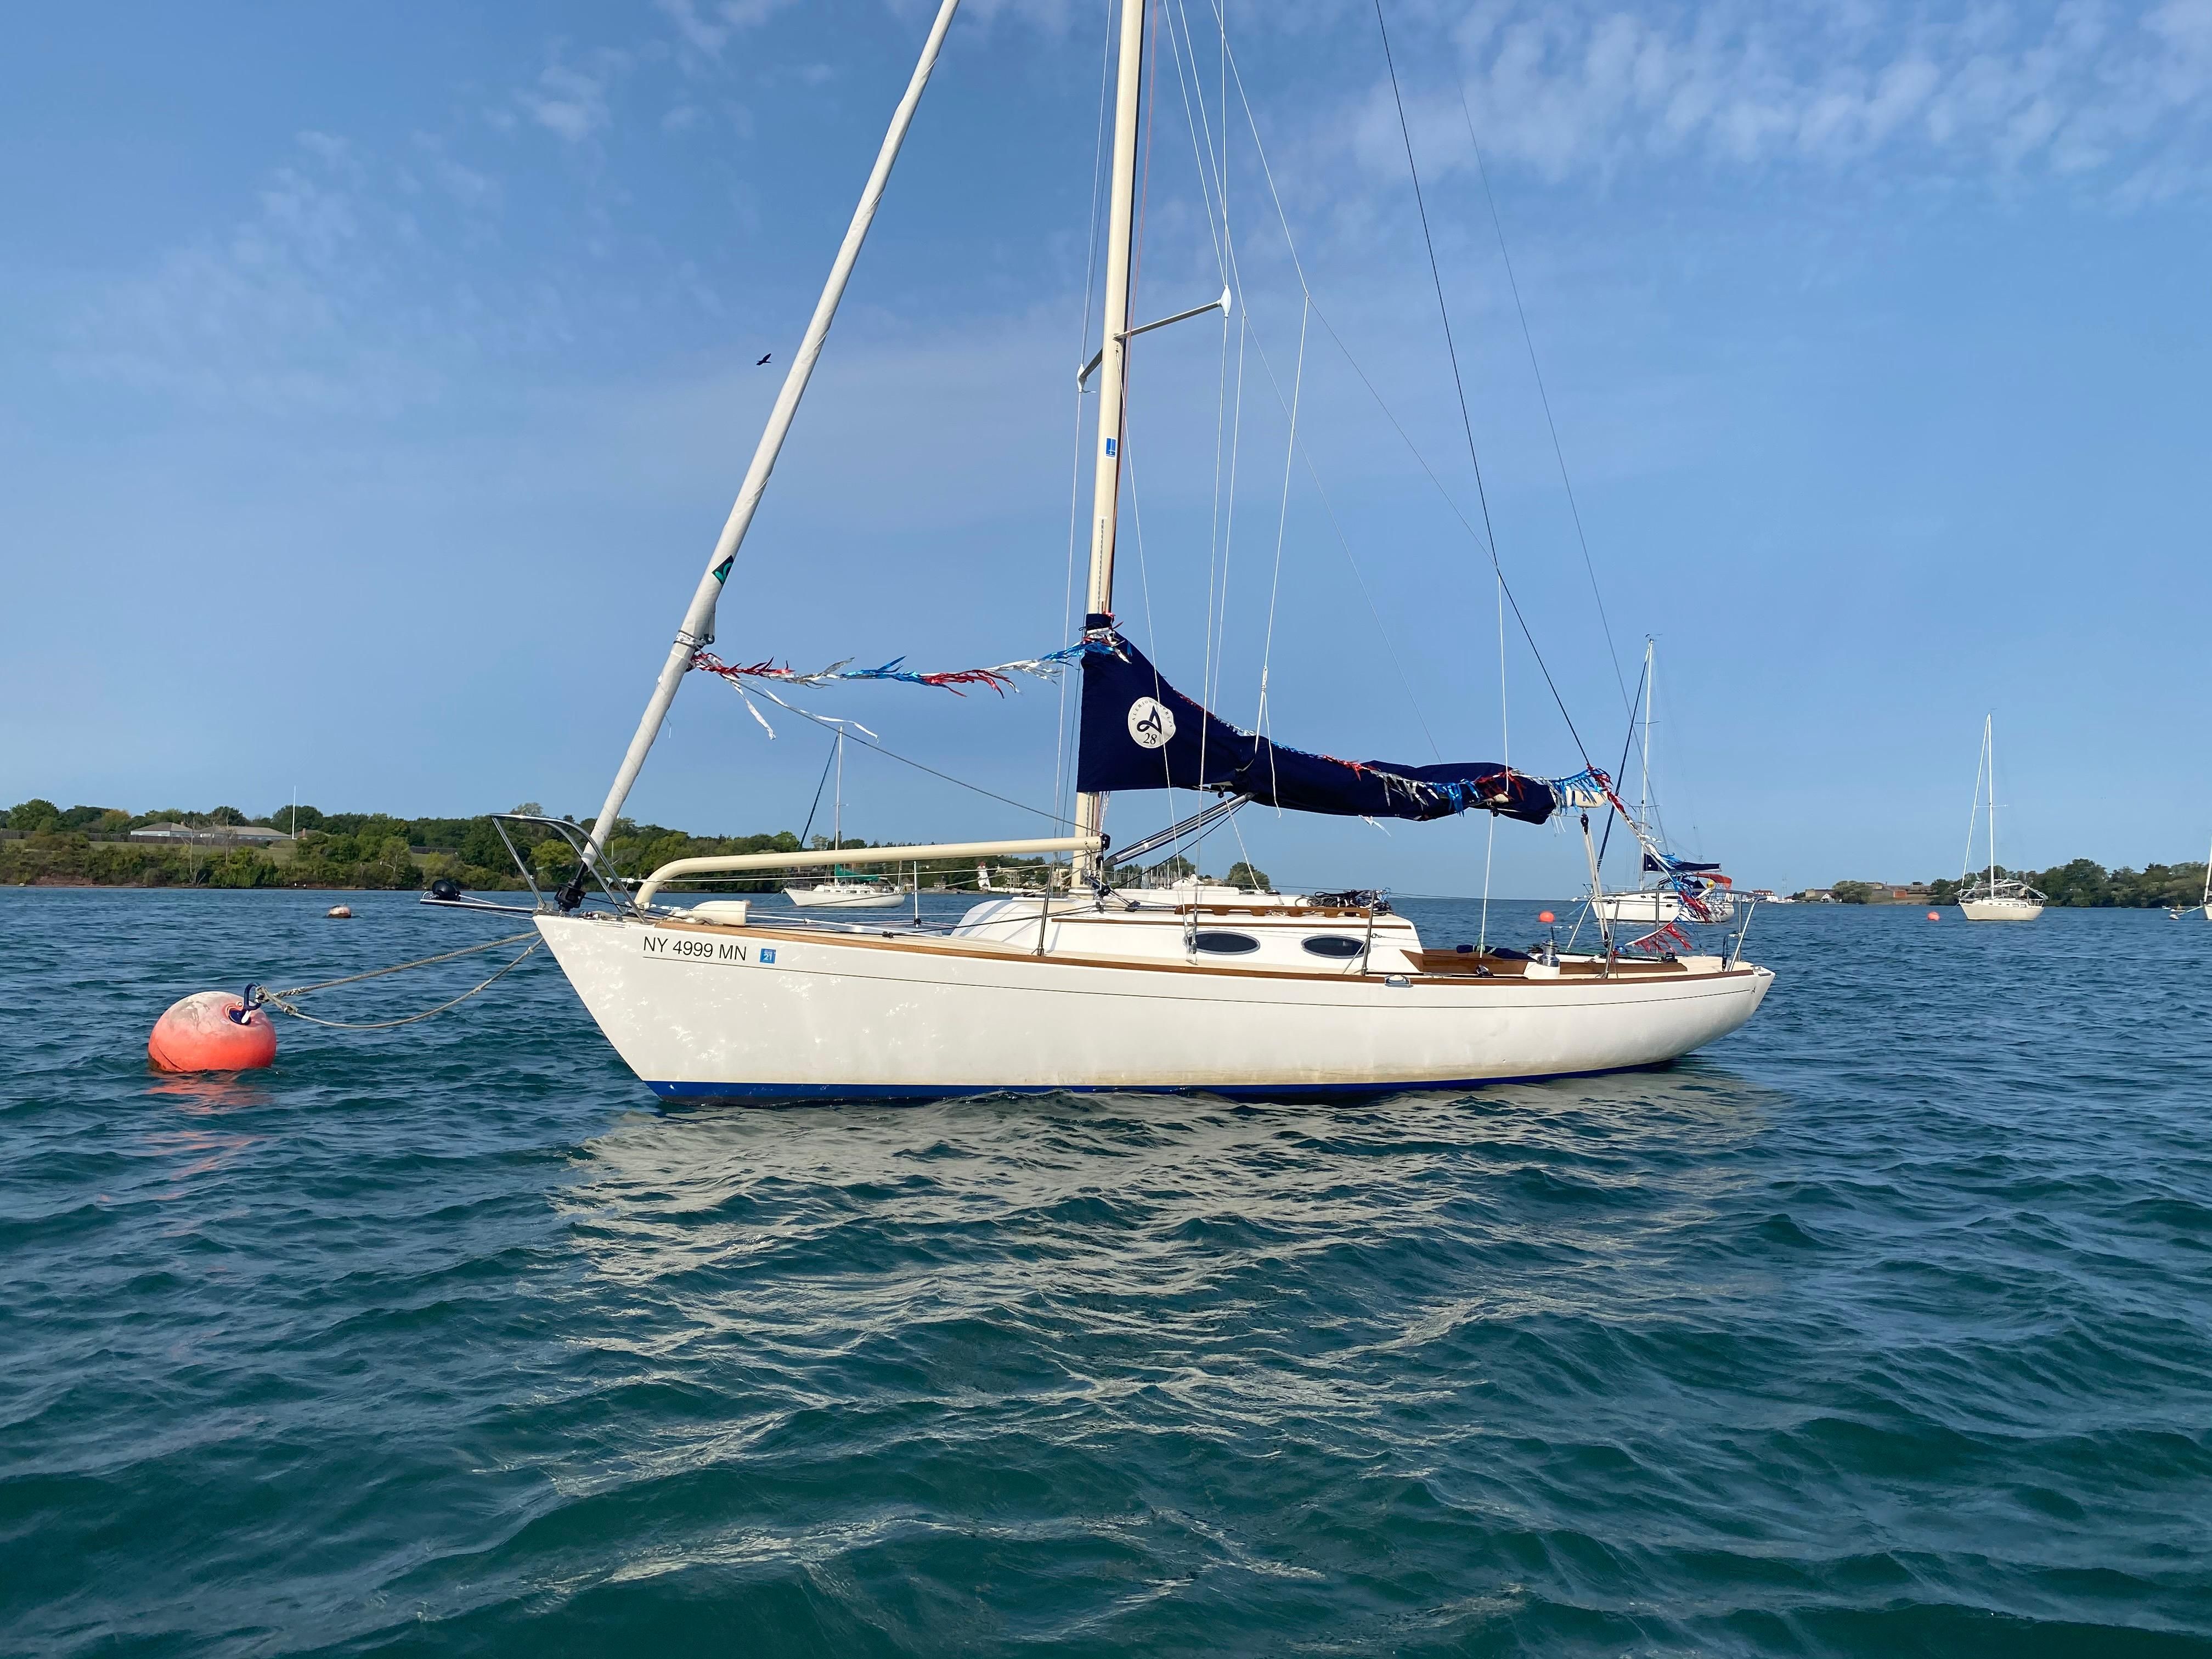 sailboat 28 for sale